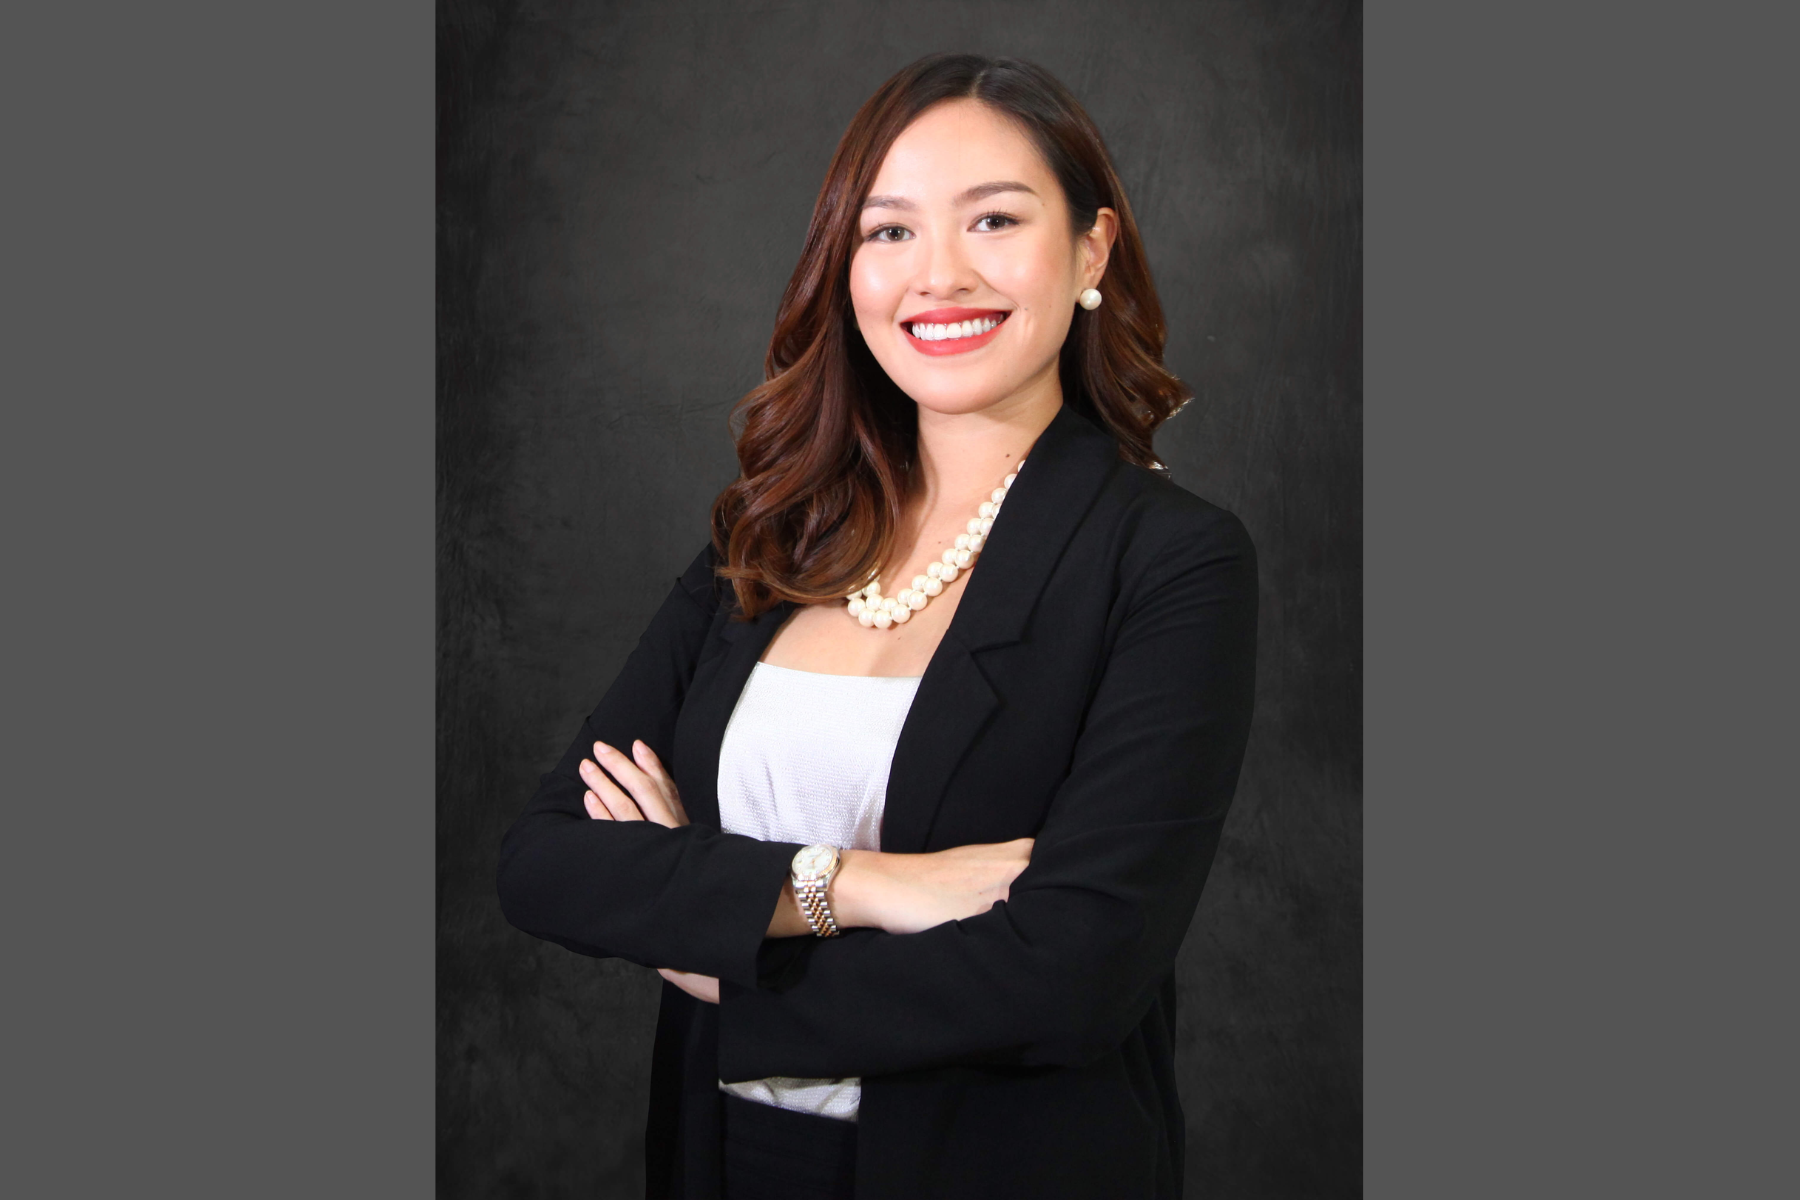 Jo Robles wearing a formal attire on a dark gradient background